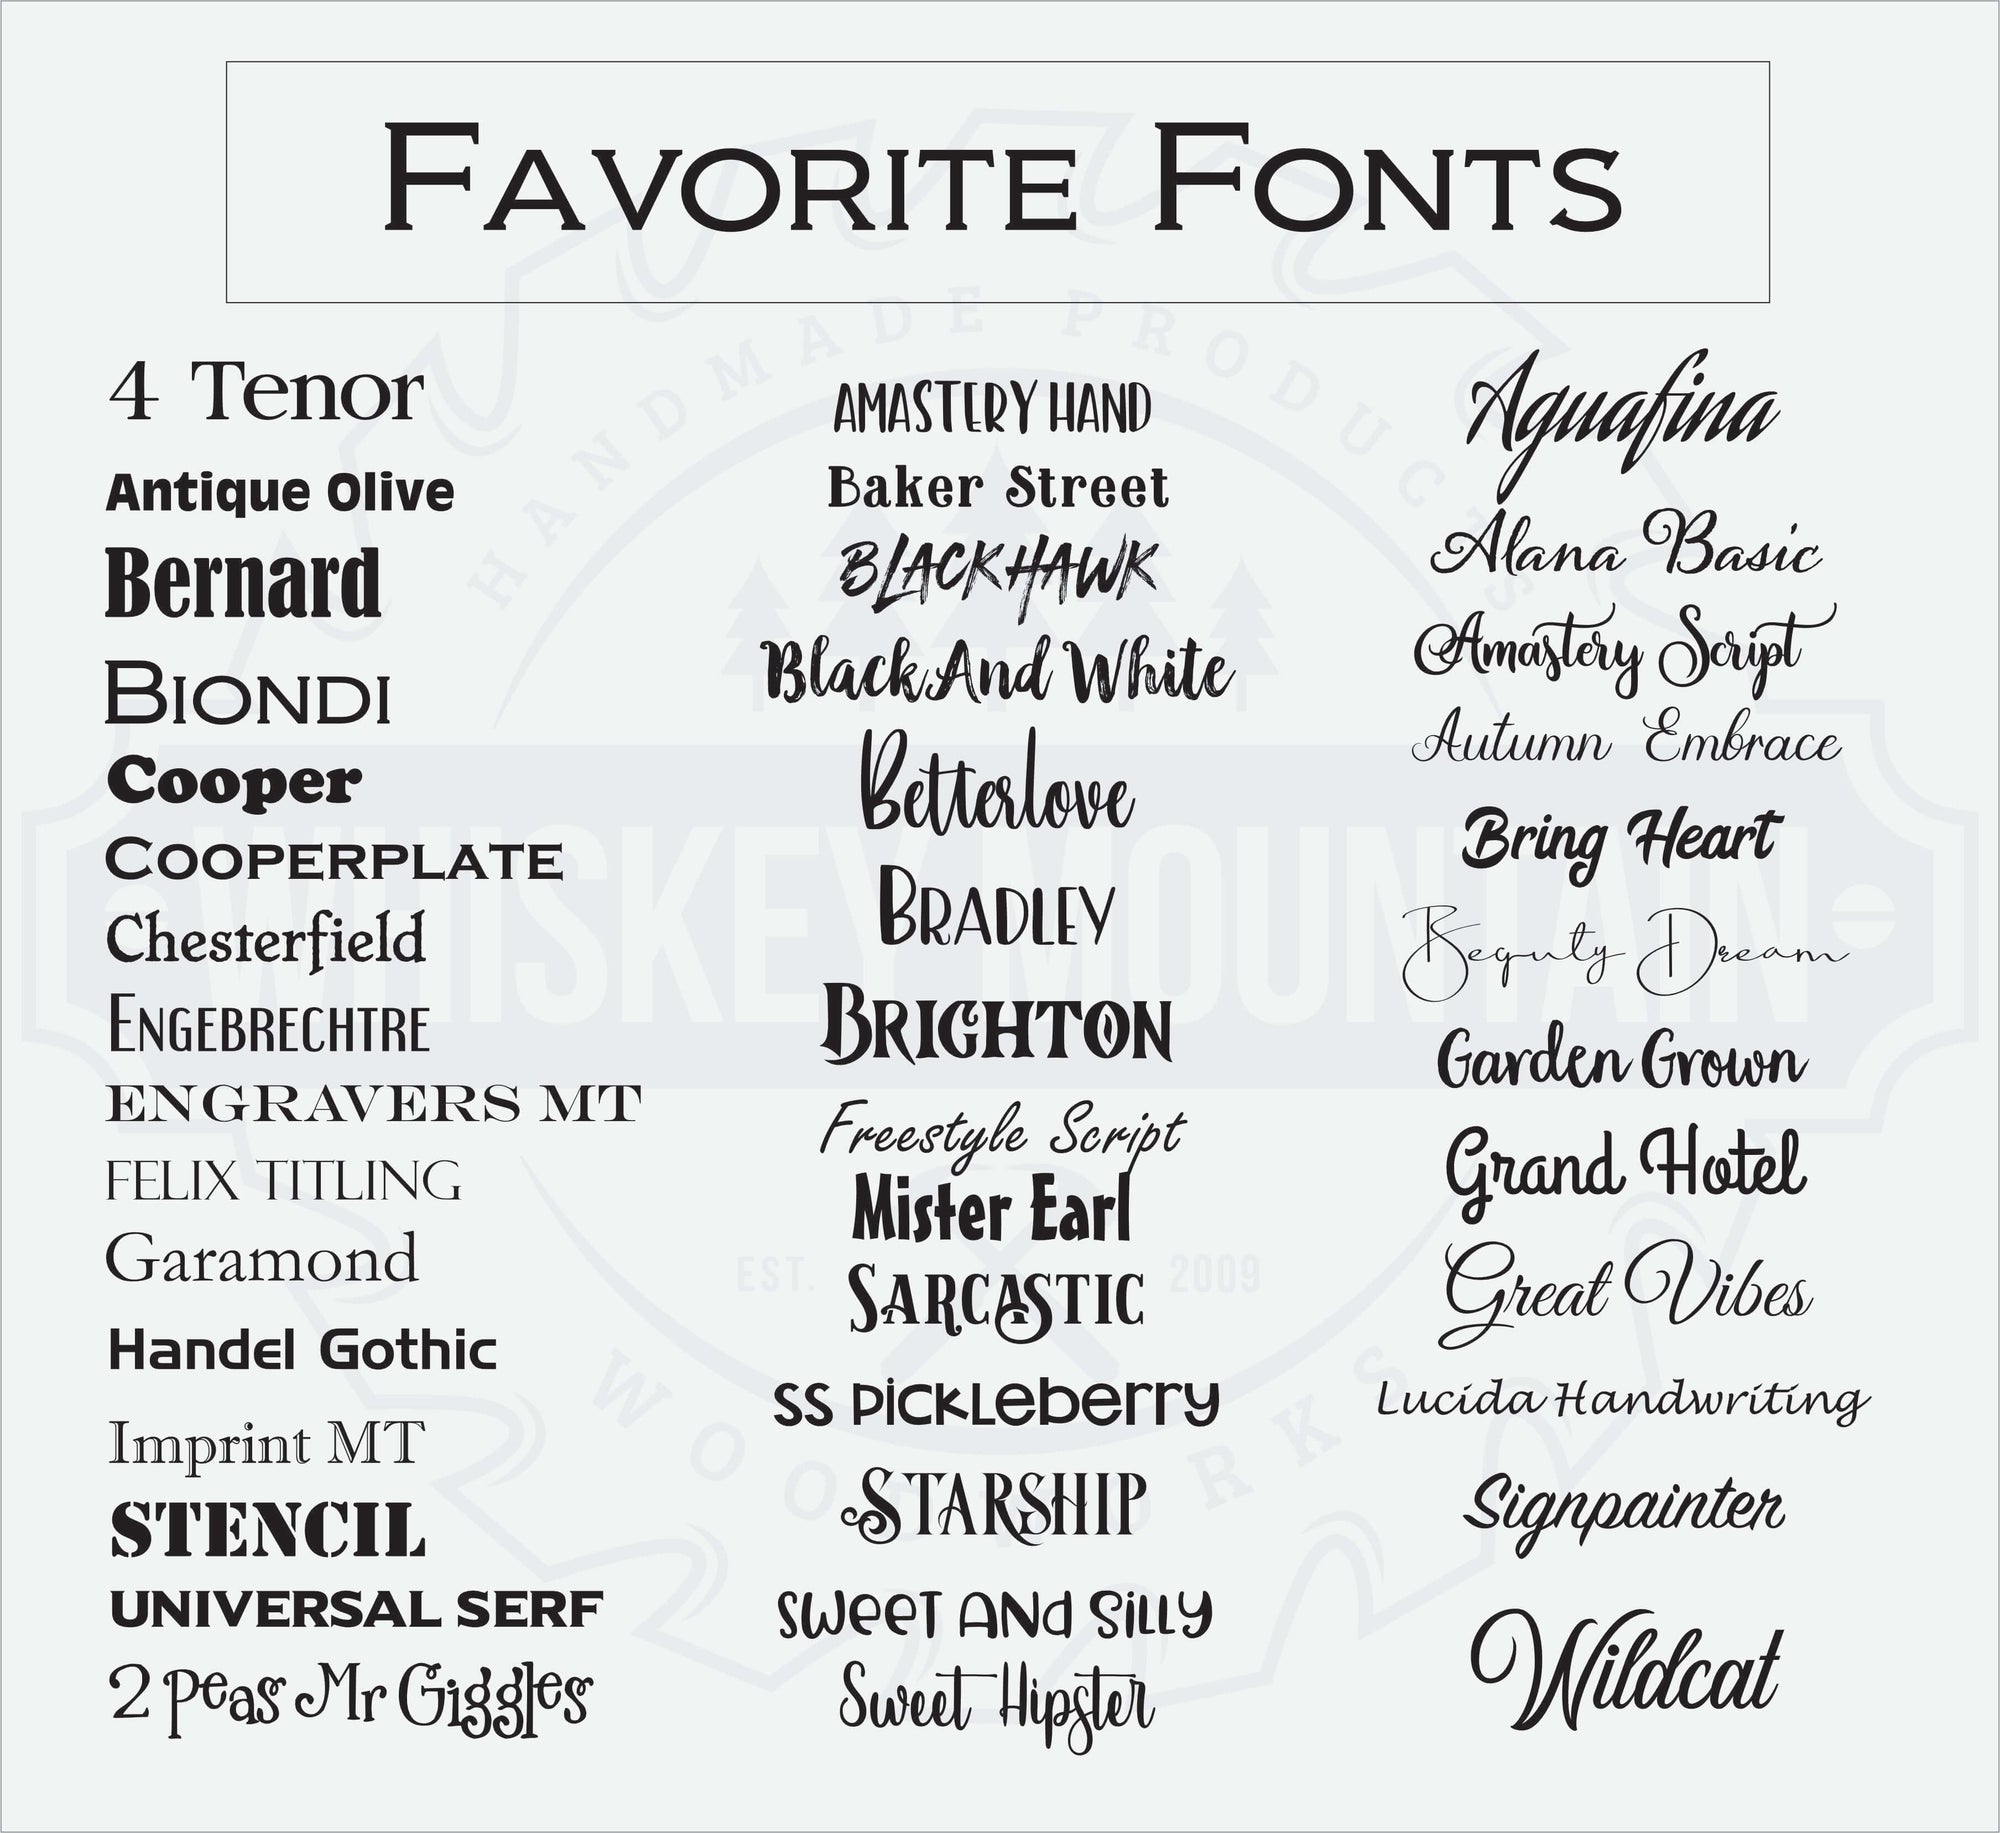 List showing fonts available for personalization